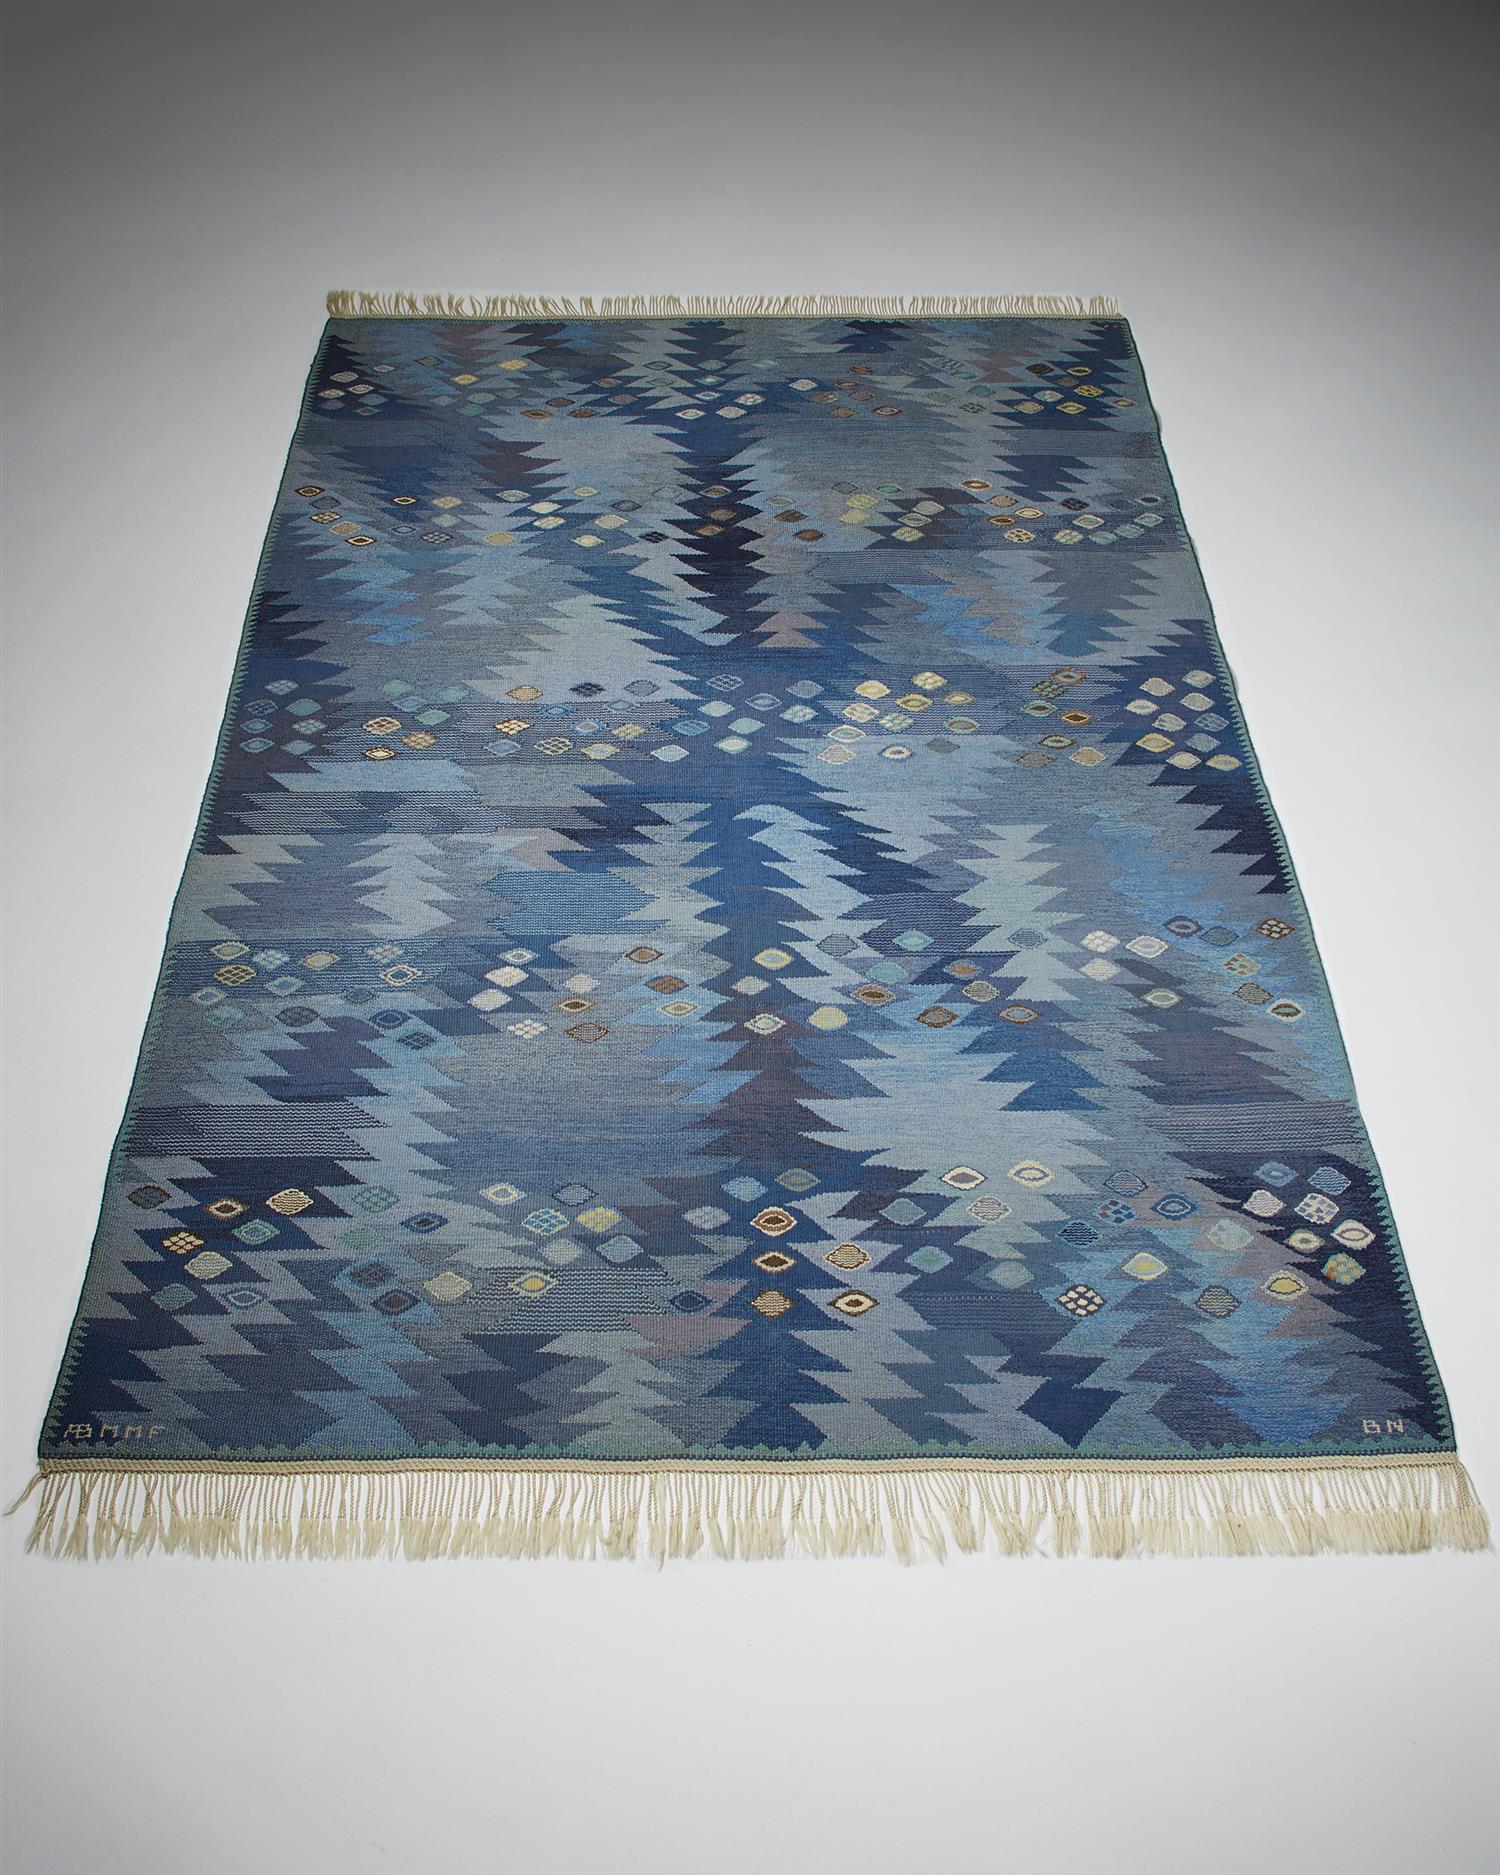 Rug “Seaweed” designed by Barbro Nilsson for Märta Måås-Fjetterström MMF, 
Sweden, 1950s.

Pure wool in tapestry technique.